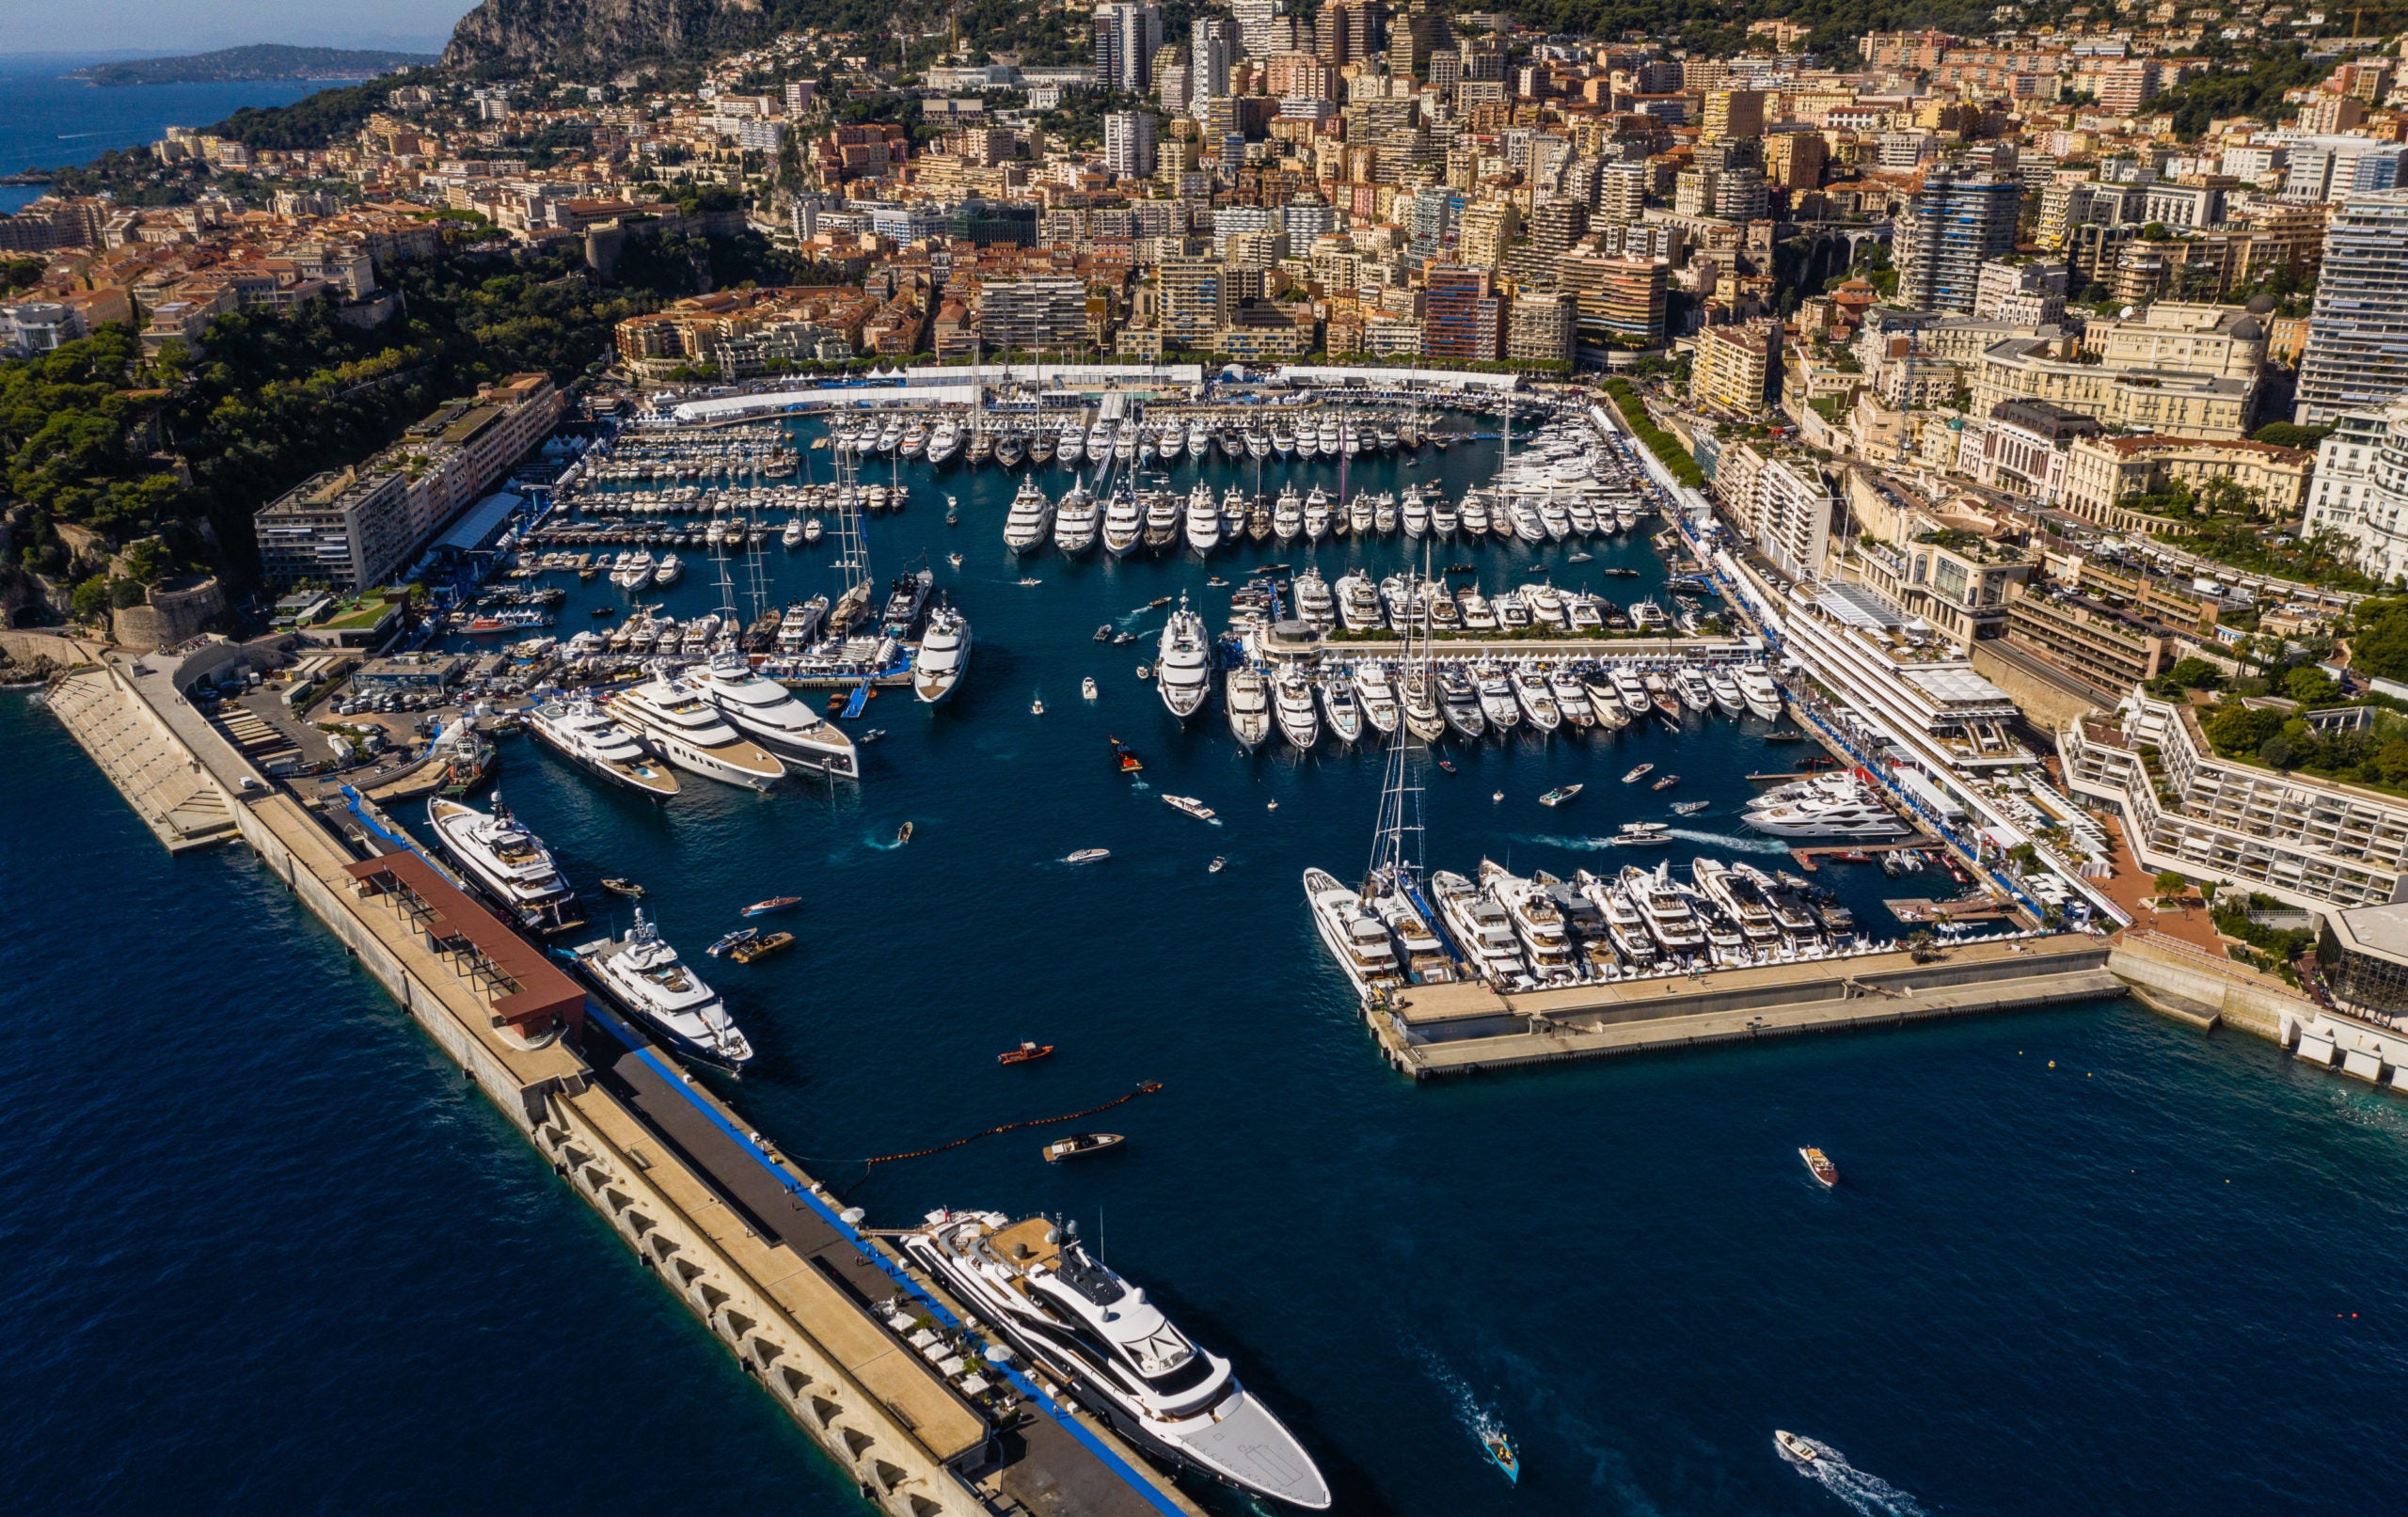 The Best Superyachts at the Monaco Yacht Show